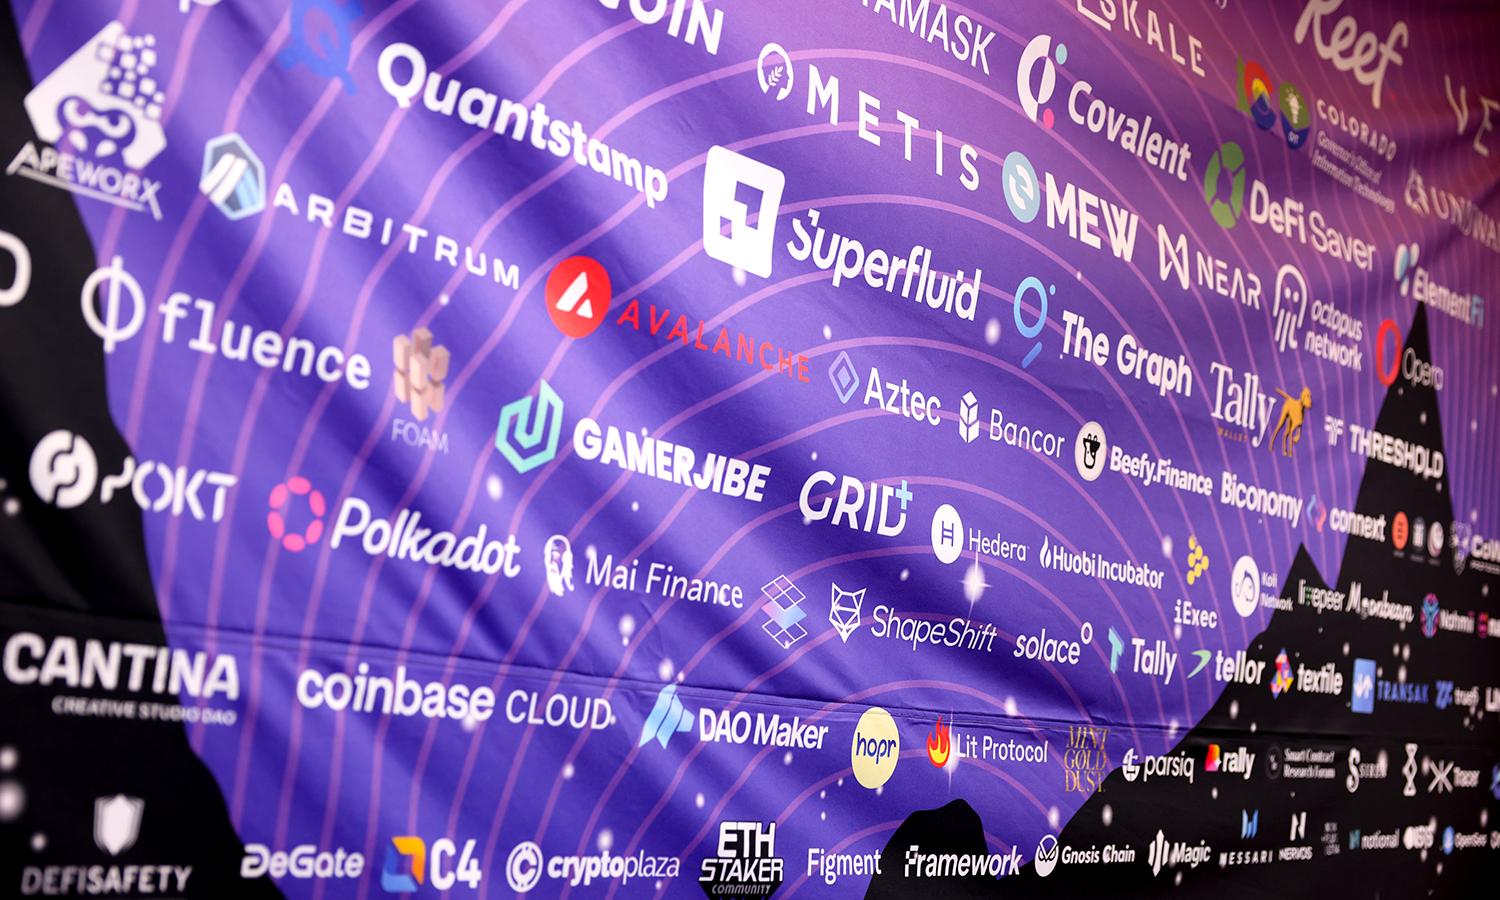 A banner lists the sponsors of a cryptocurrency convention.